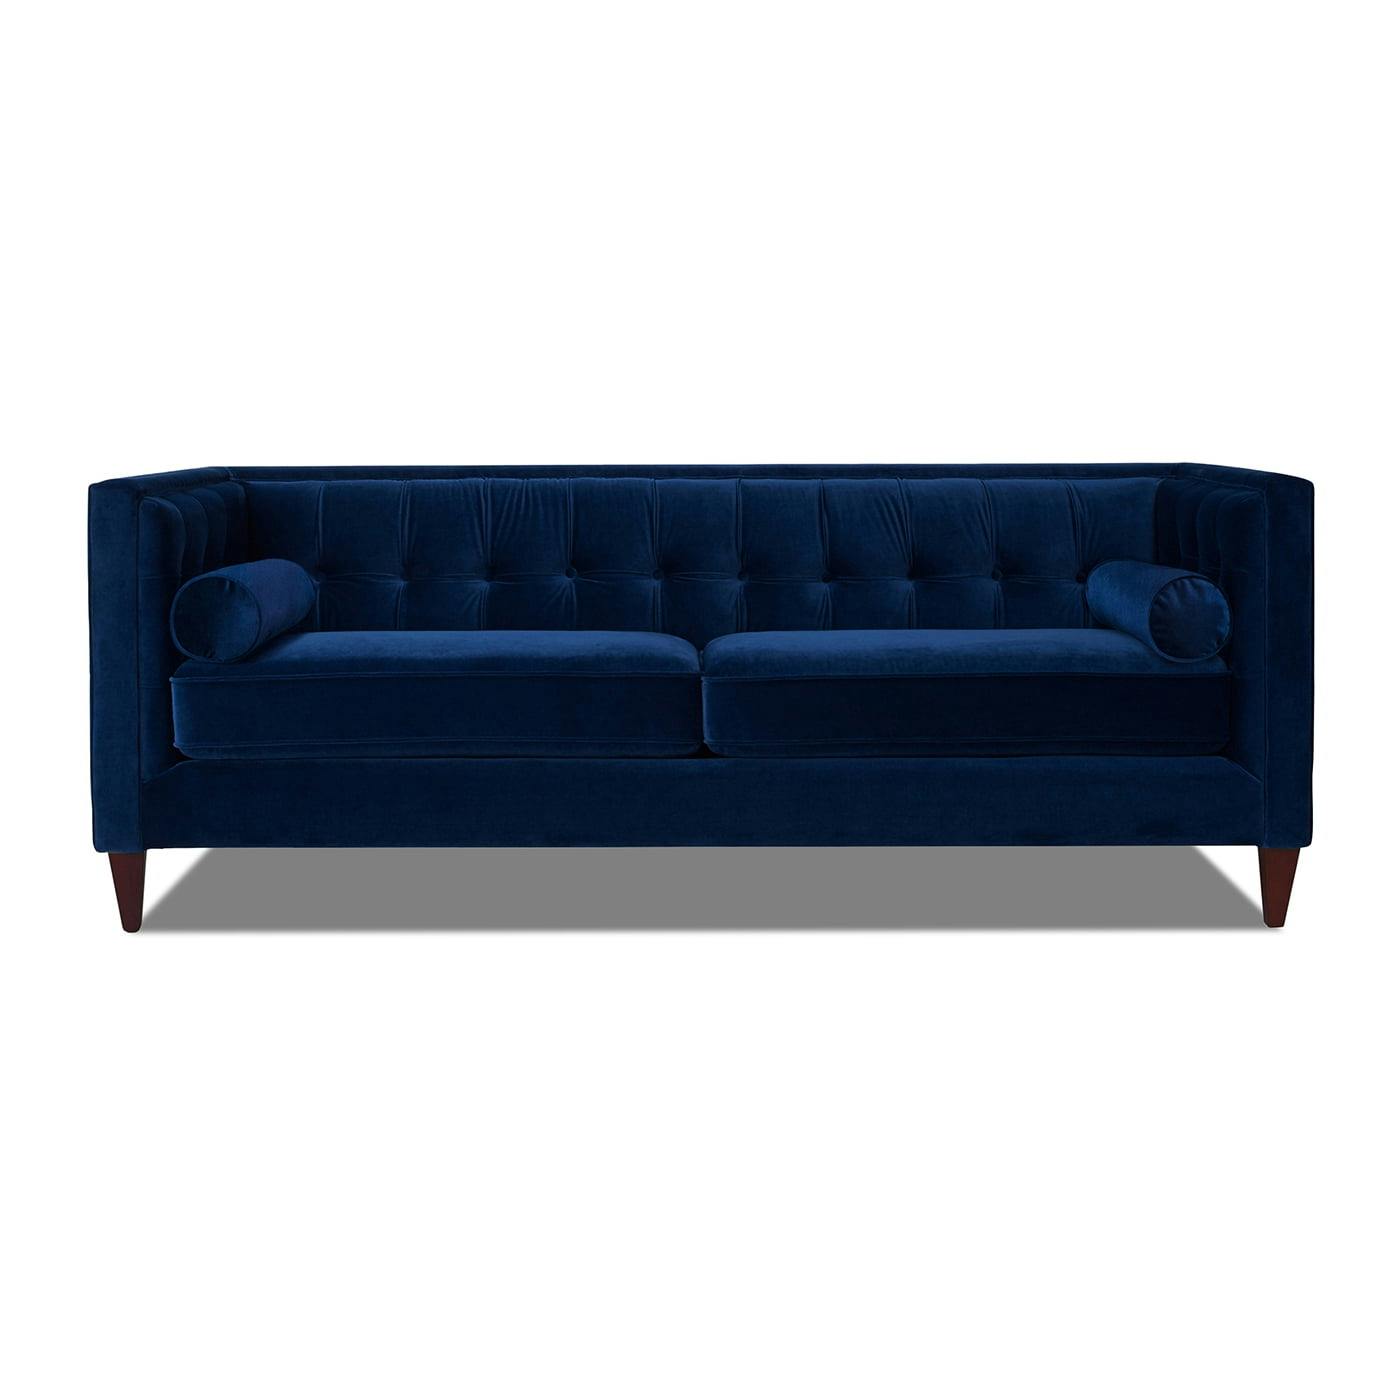 Elegant Navy Blue Velvet Chesterfield Sofa with Tufted Accents